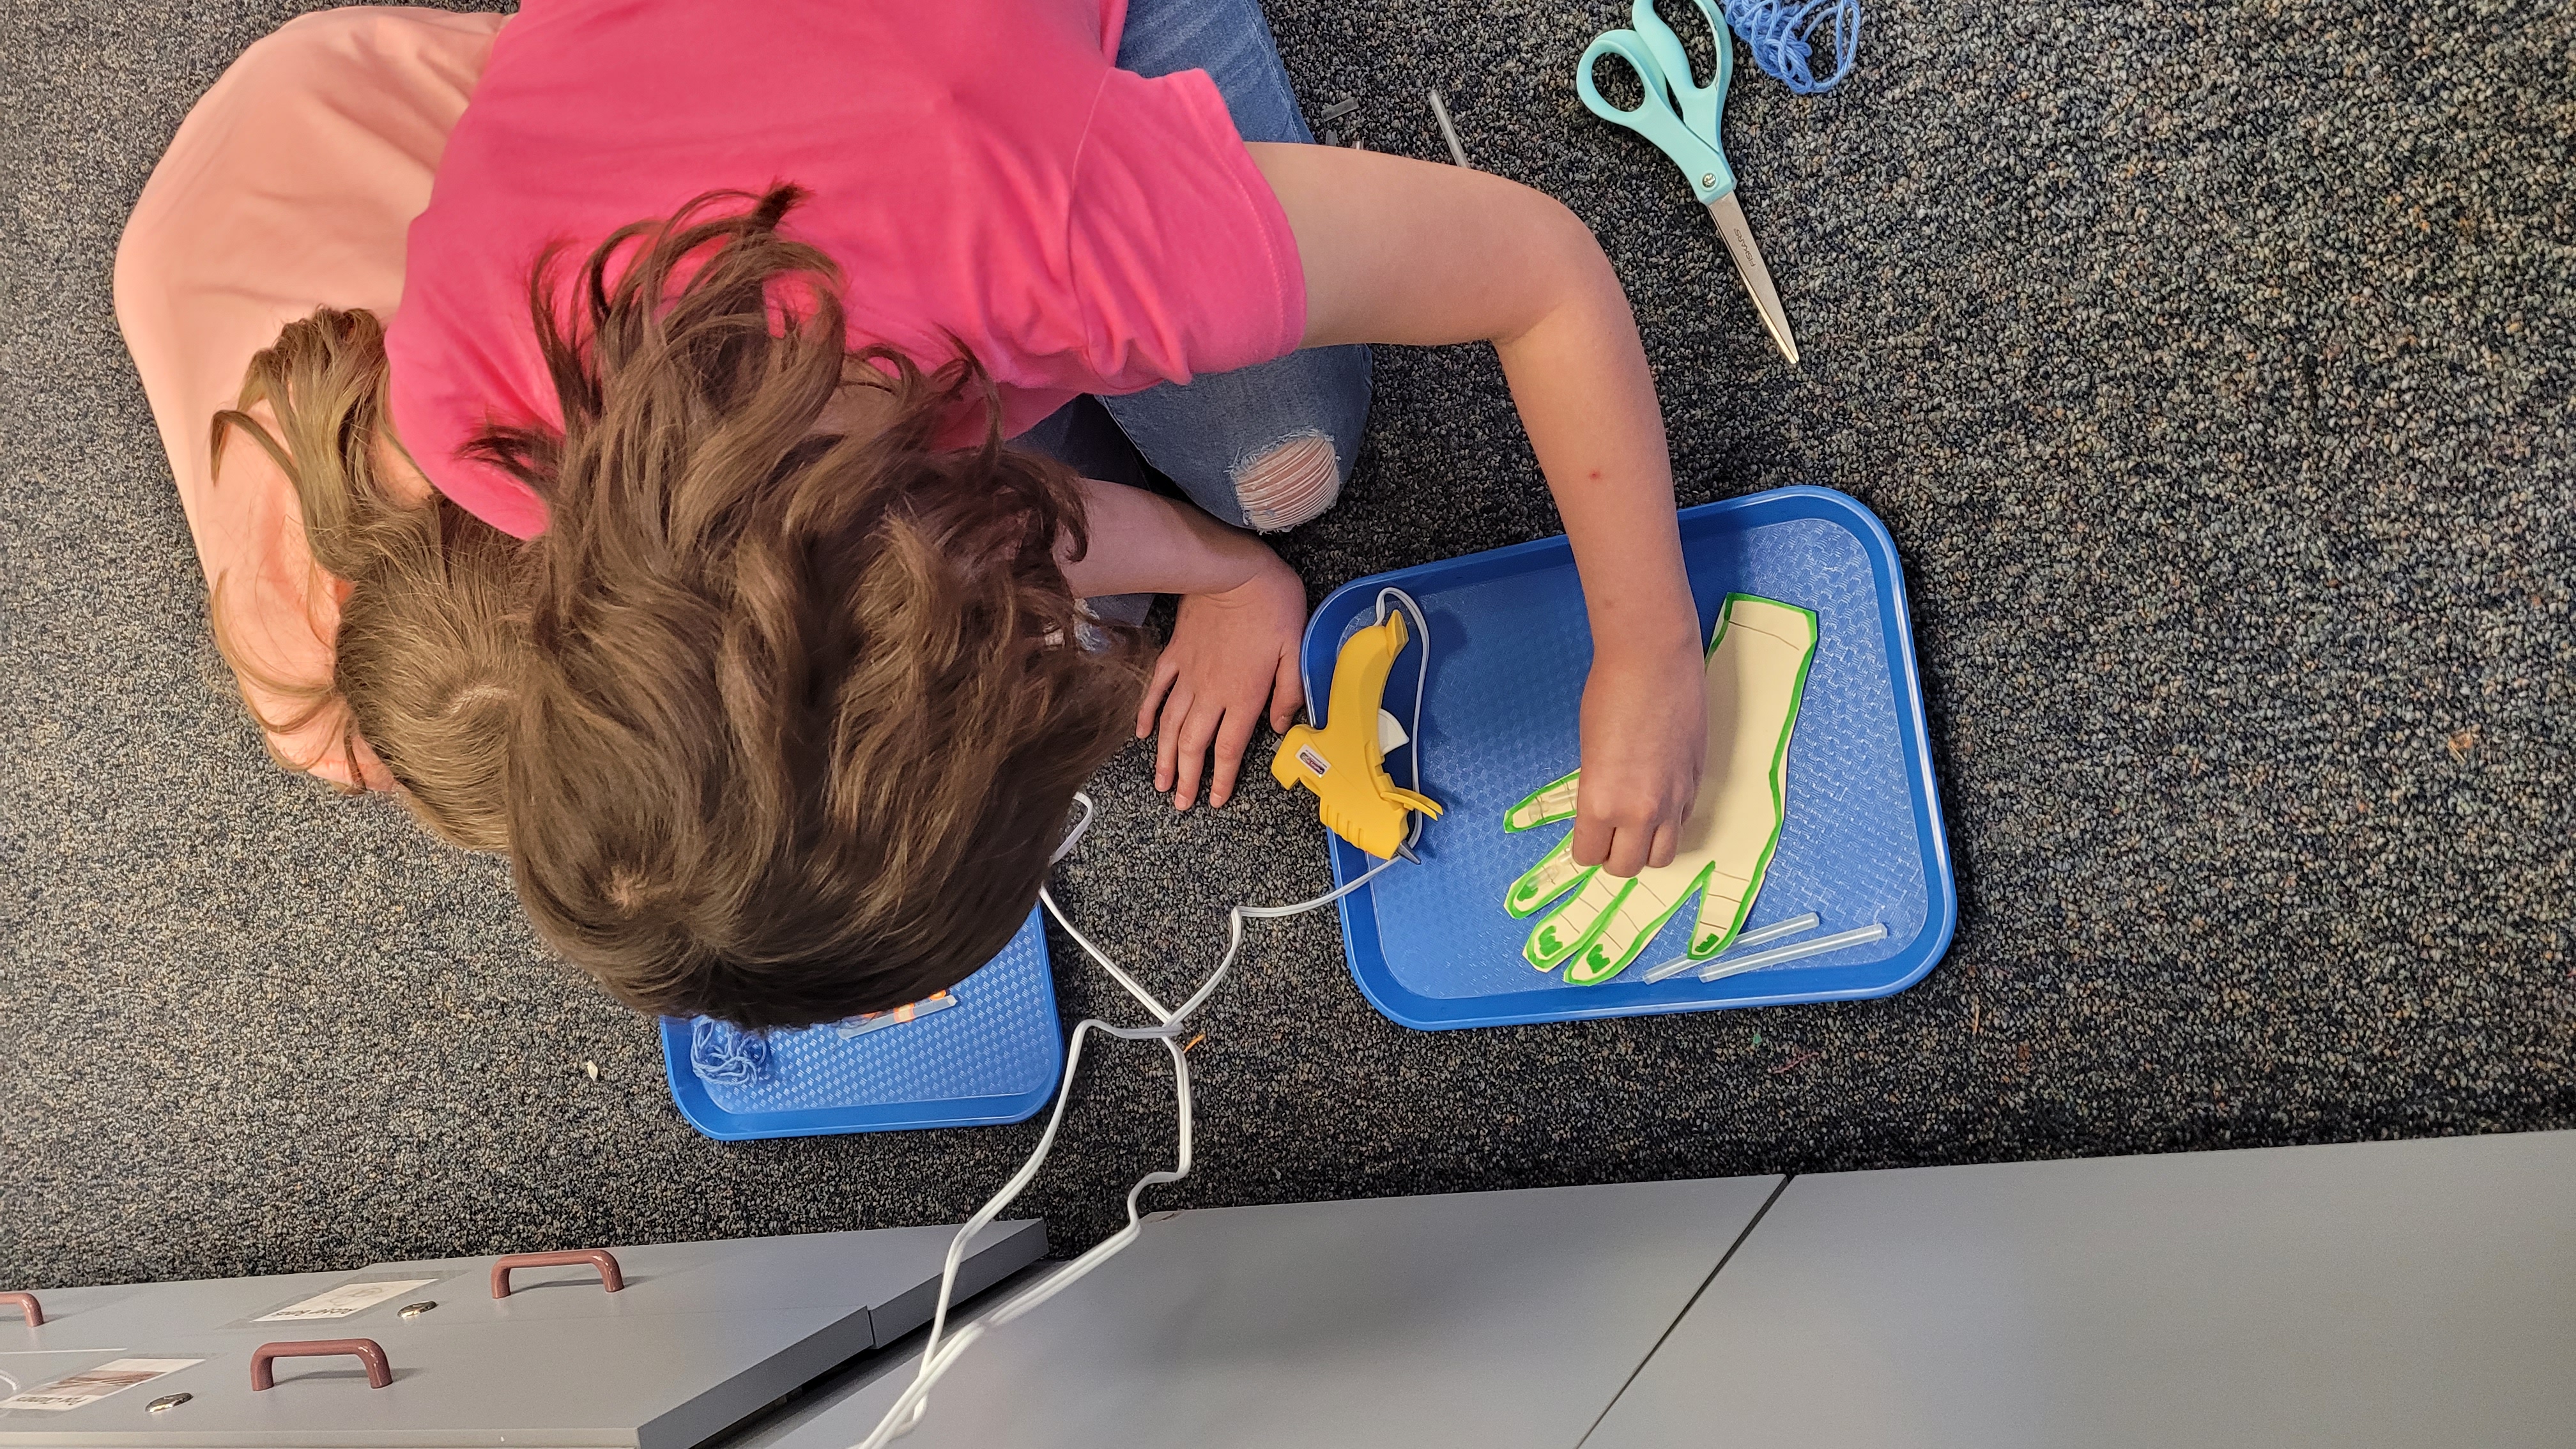 A student works on a handprint art project with a hot glue gun and scissors